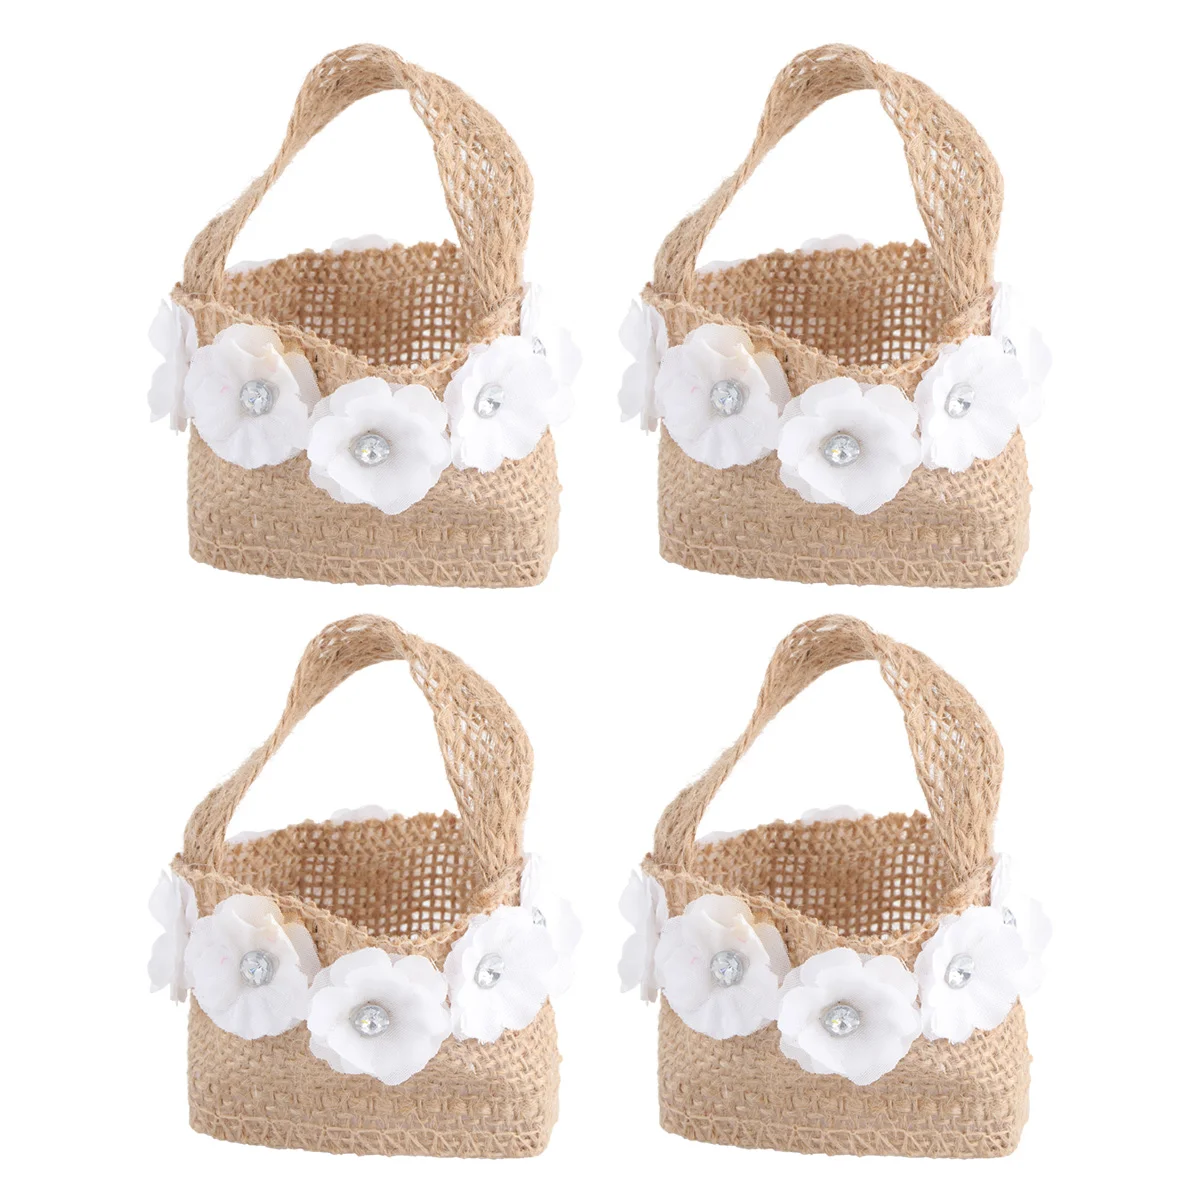 

Basket Storage Burlap Country Girl Giftss For Wedding Ceremony Flower Baskets Small Small Basket Gifts Basket Storage